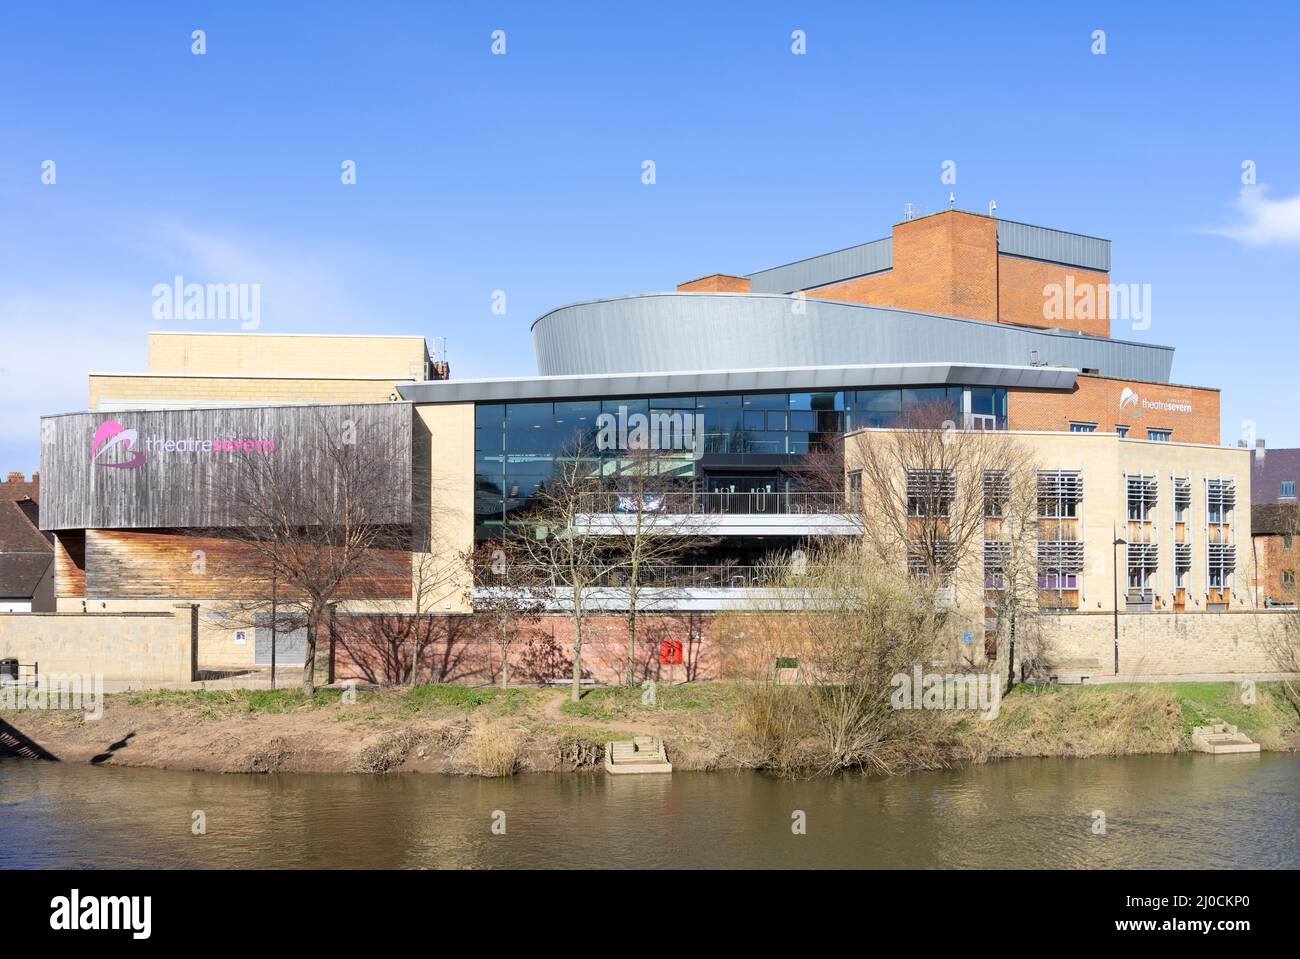 TheatreSevern or Theatre Severn Frankwell Quay by the River Severn Shrewsbury Shropshire England UK GB Europe Stock Photo